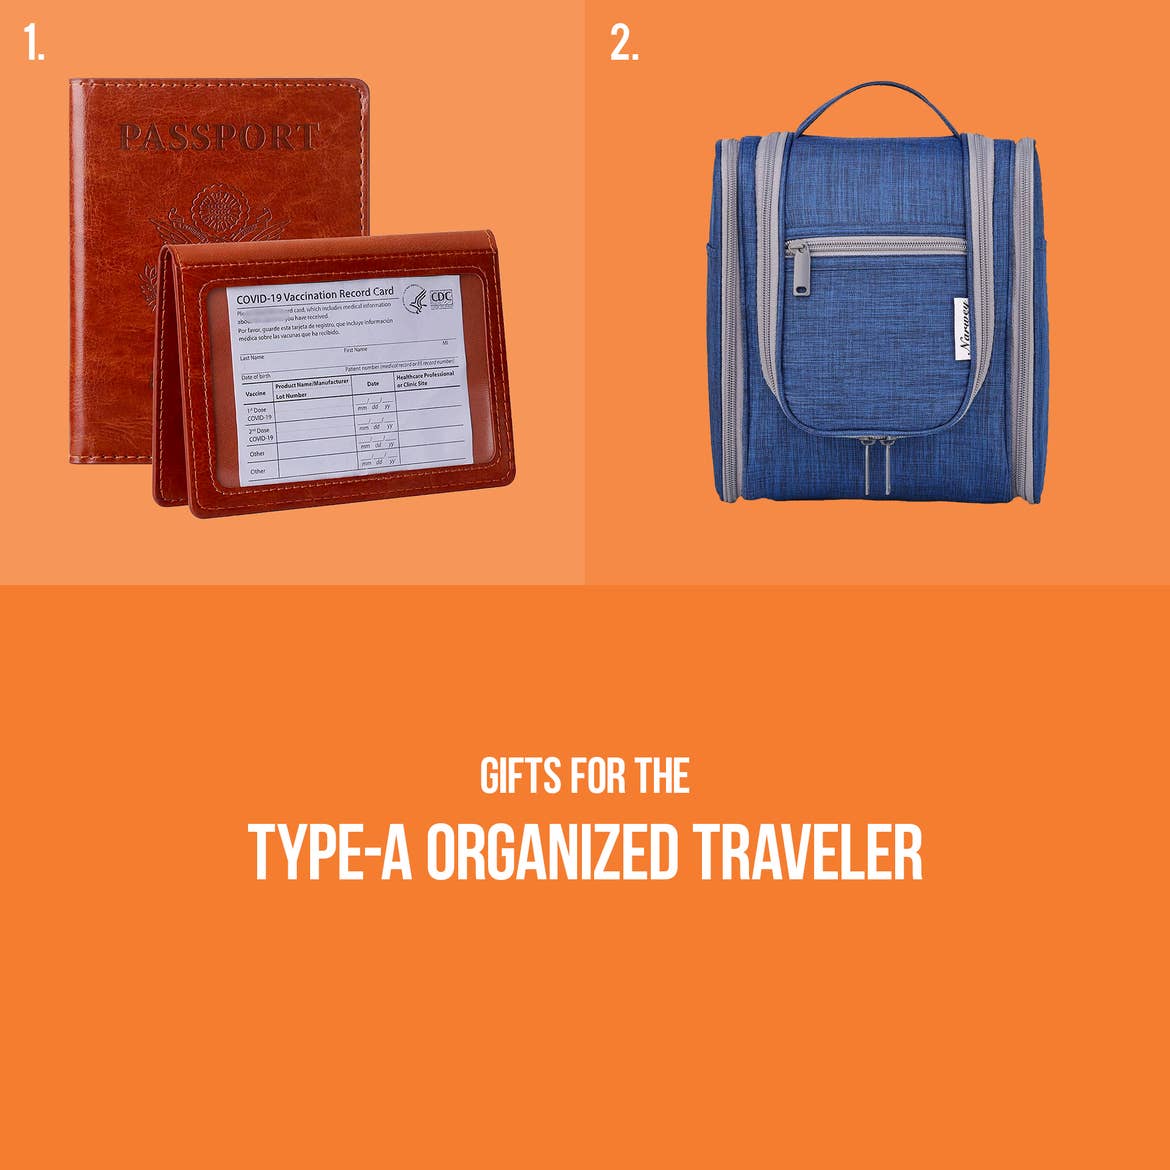 A passport holder and insulated cooler image are placed on top of an orange graphic that reads, 'Gifts for the Type-A organized traveler.'